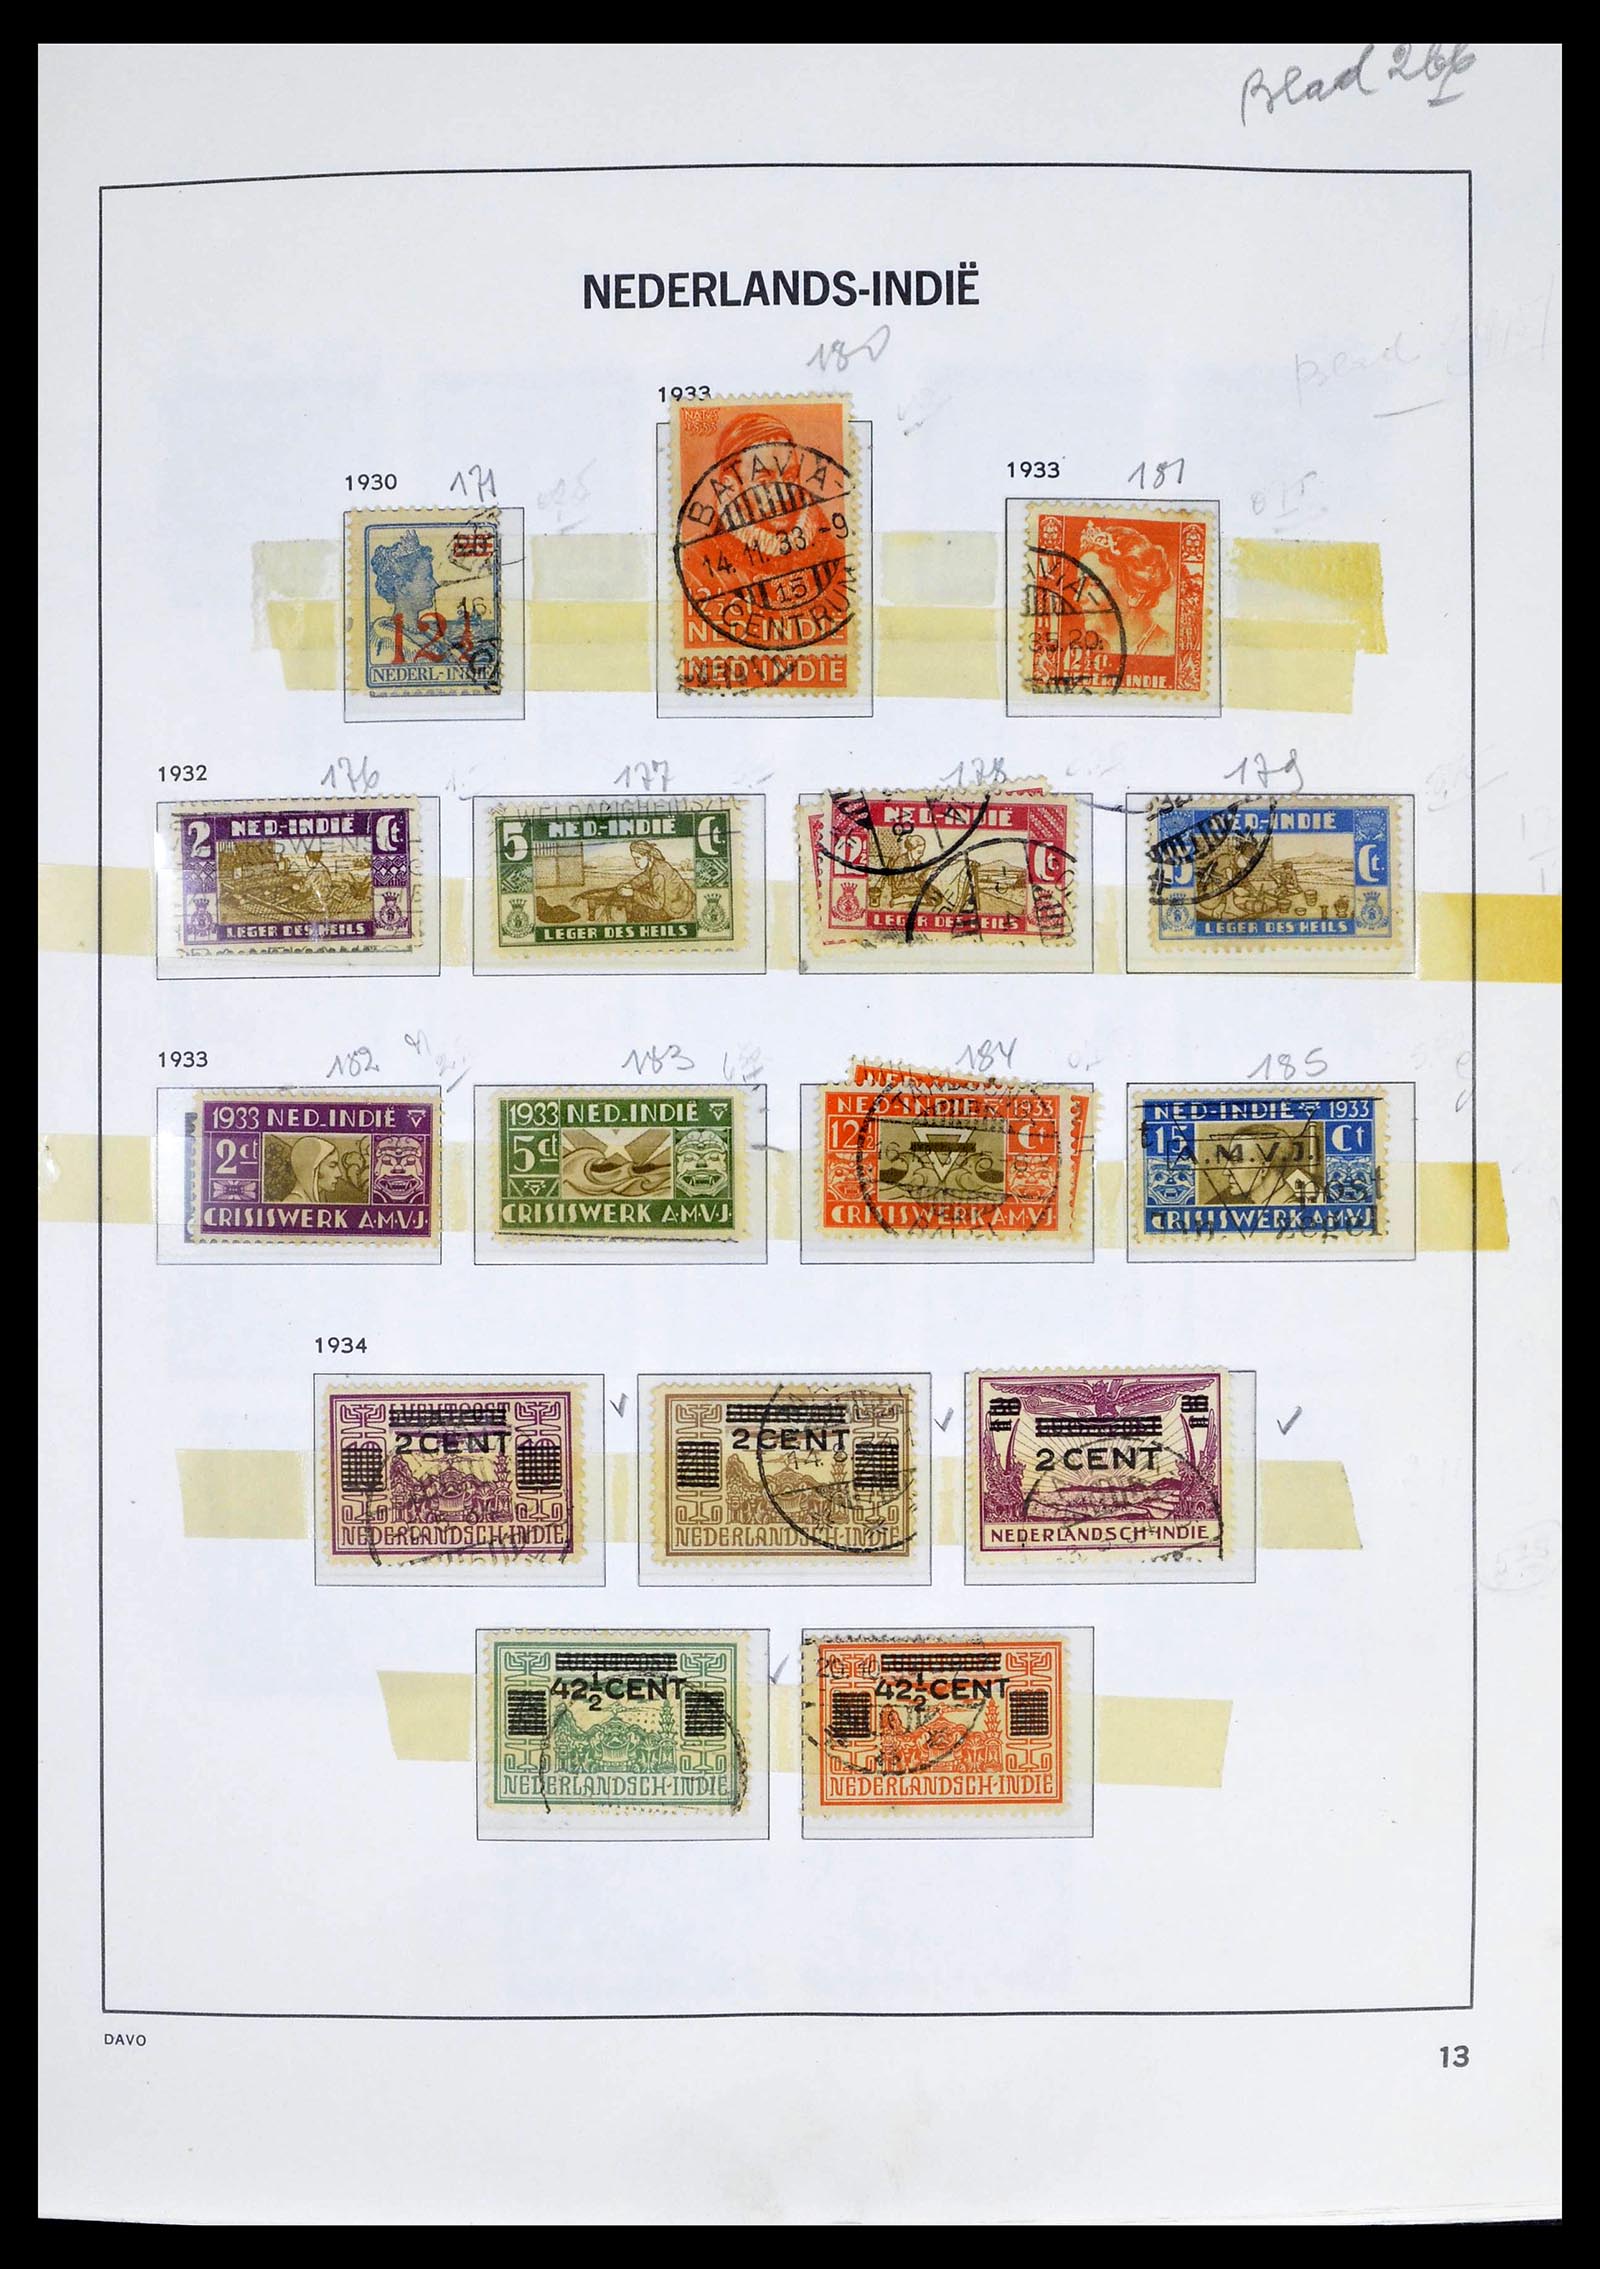 39263 0013 - Stamp collection 39263 Dutch territories 1864-1970.